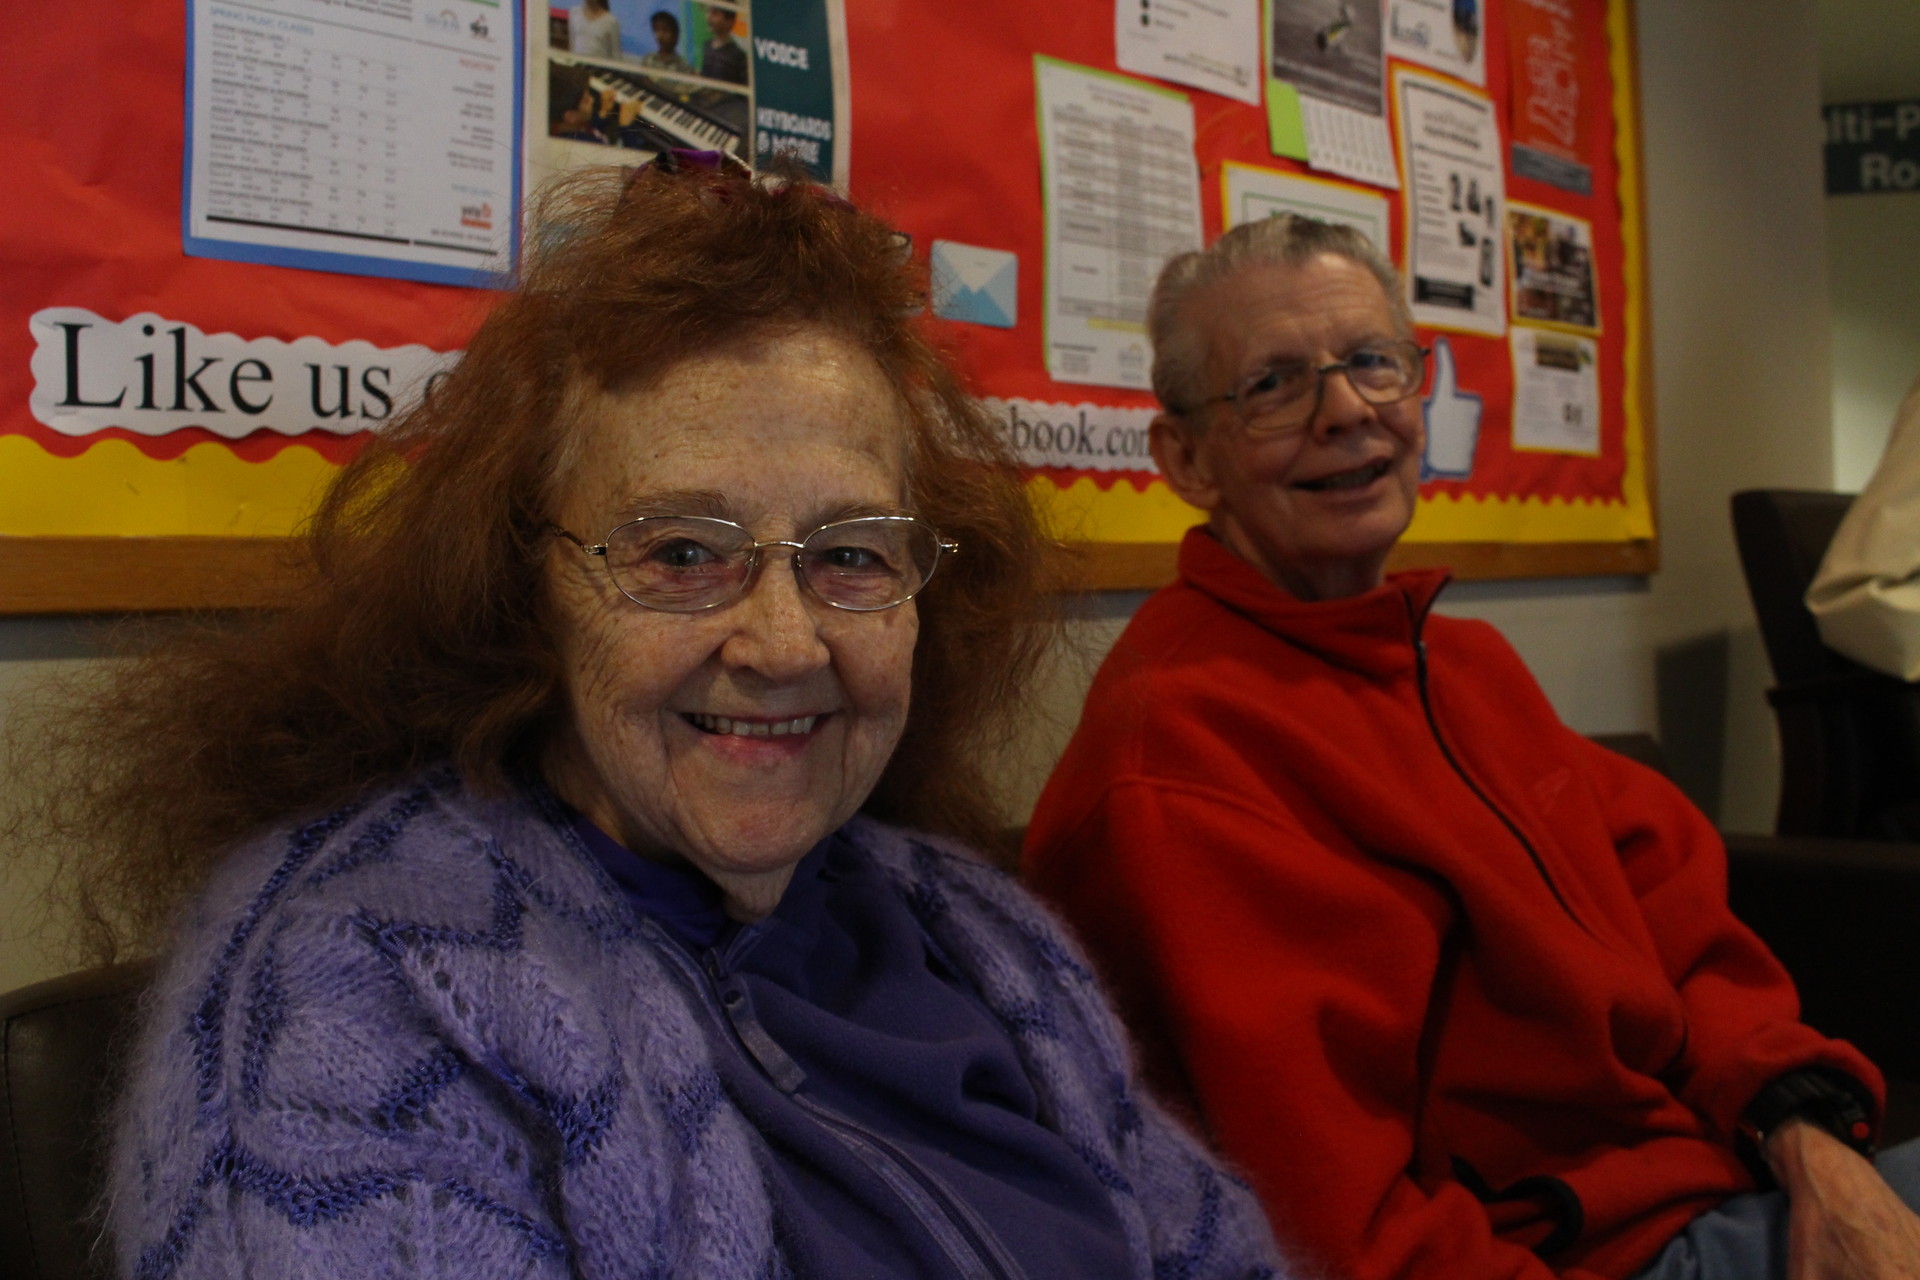 Betty Smith, 81, and Bill Painter, 75, at the Berryesa Community Center in San Jose. Unlike other seniors who frequent the center's lunch program, they agree Daylight Saving Time is a "good thing."